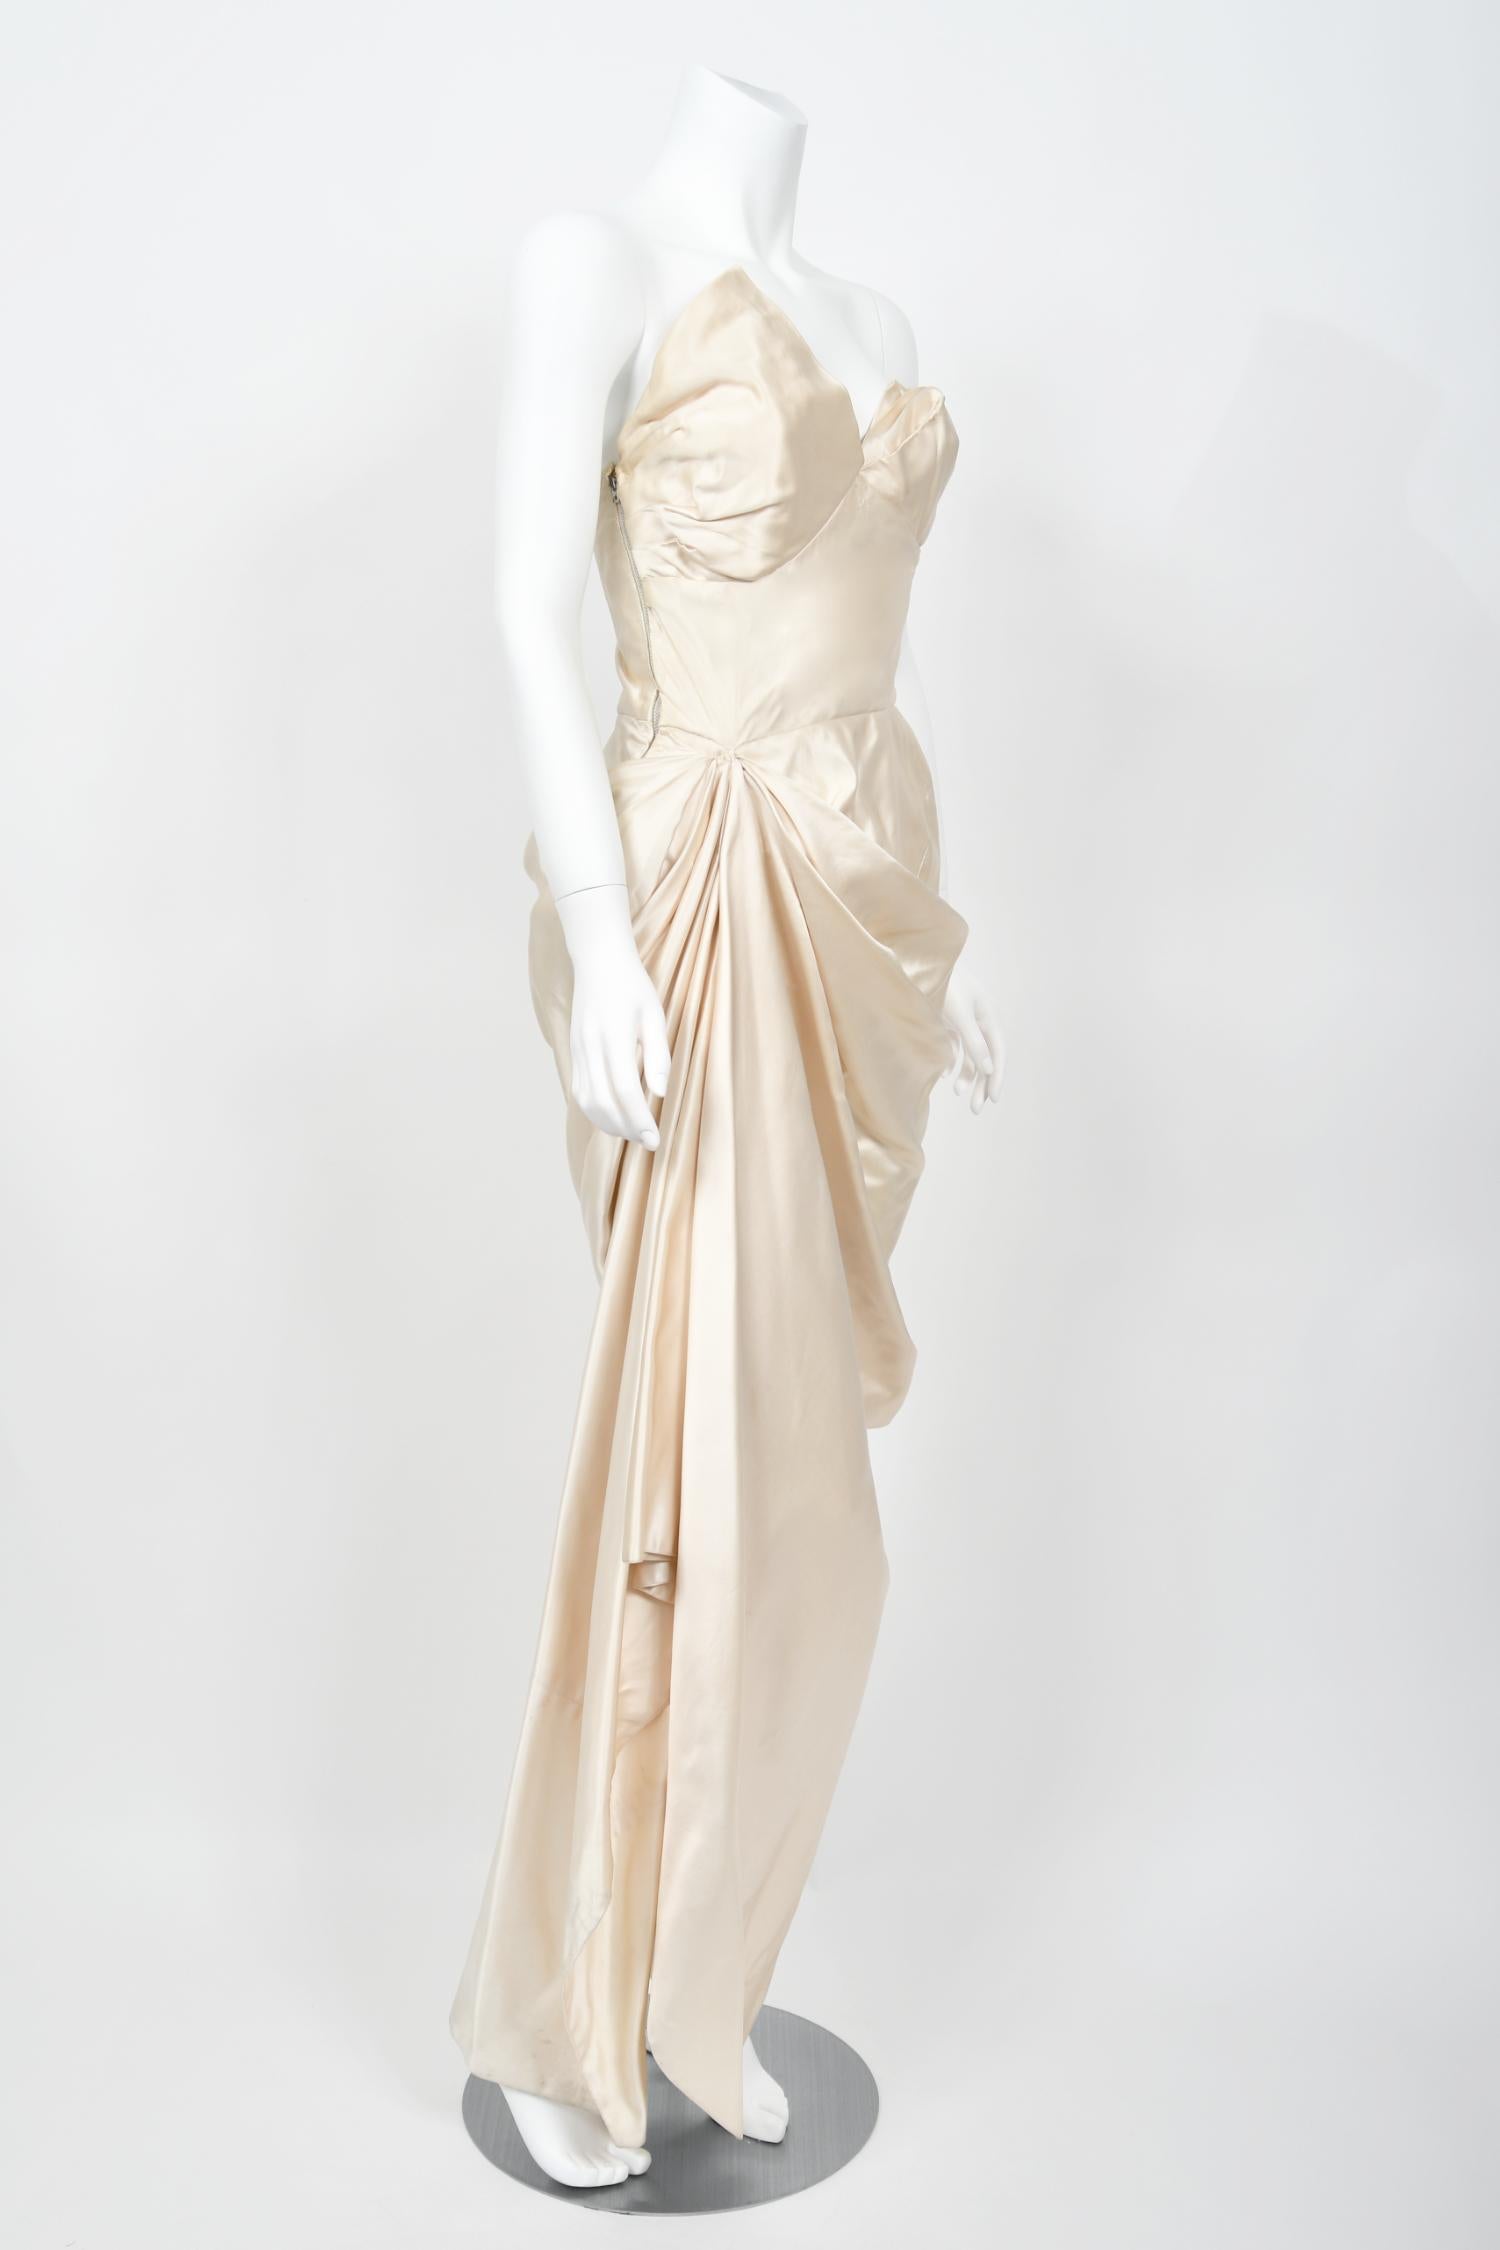 1949 Jeanne Lanvin Haute Couture Ivory Silk Satin Strapless Draped Bridal Gown  For Sale 1